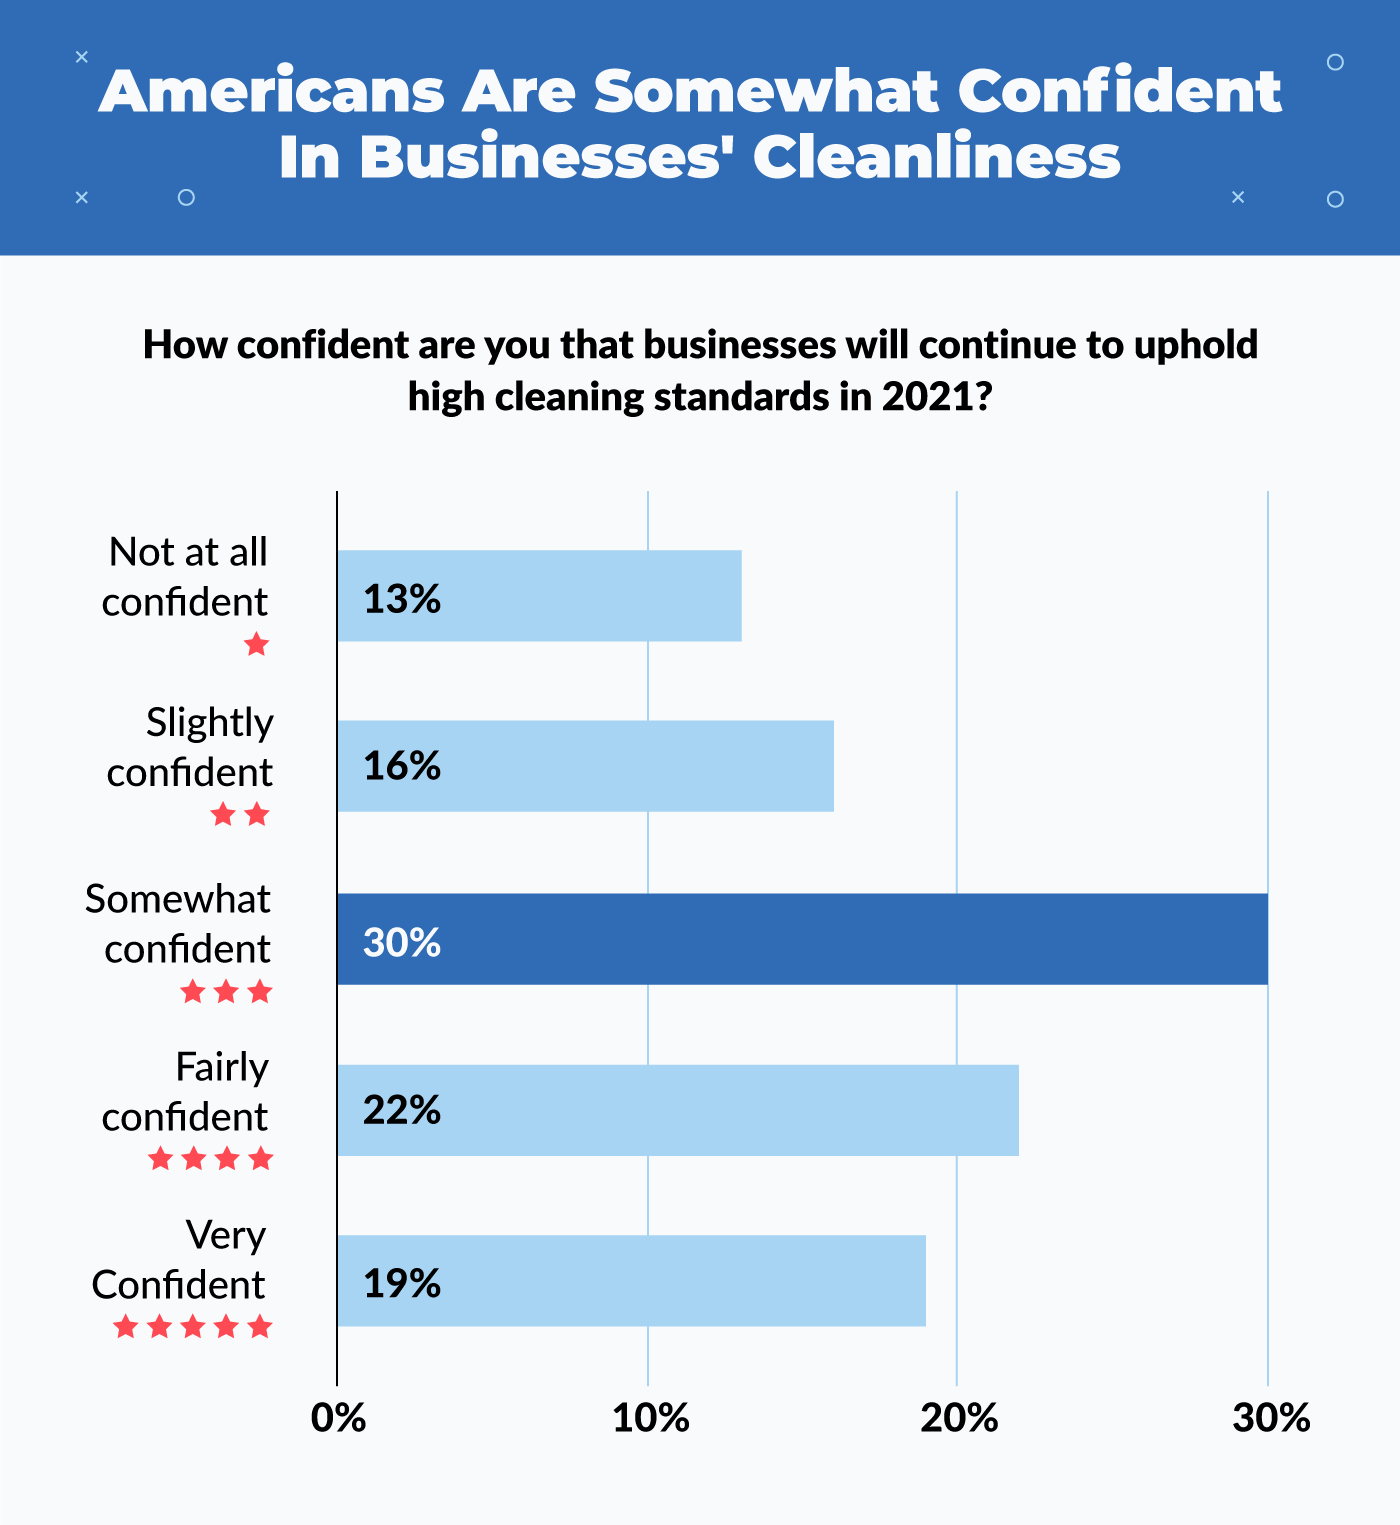 Americans are somewhat confident in business' cleanliness